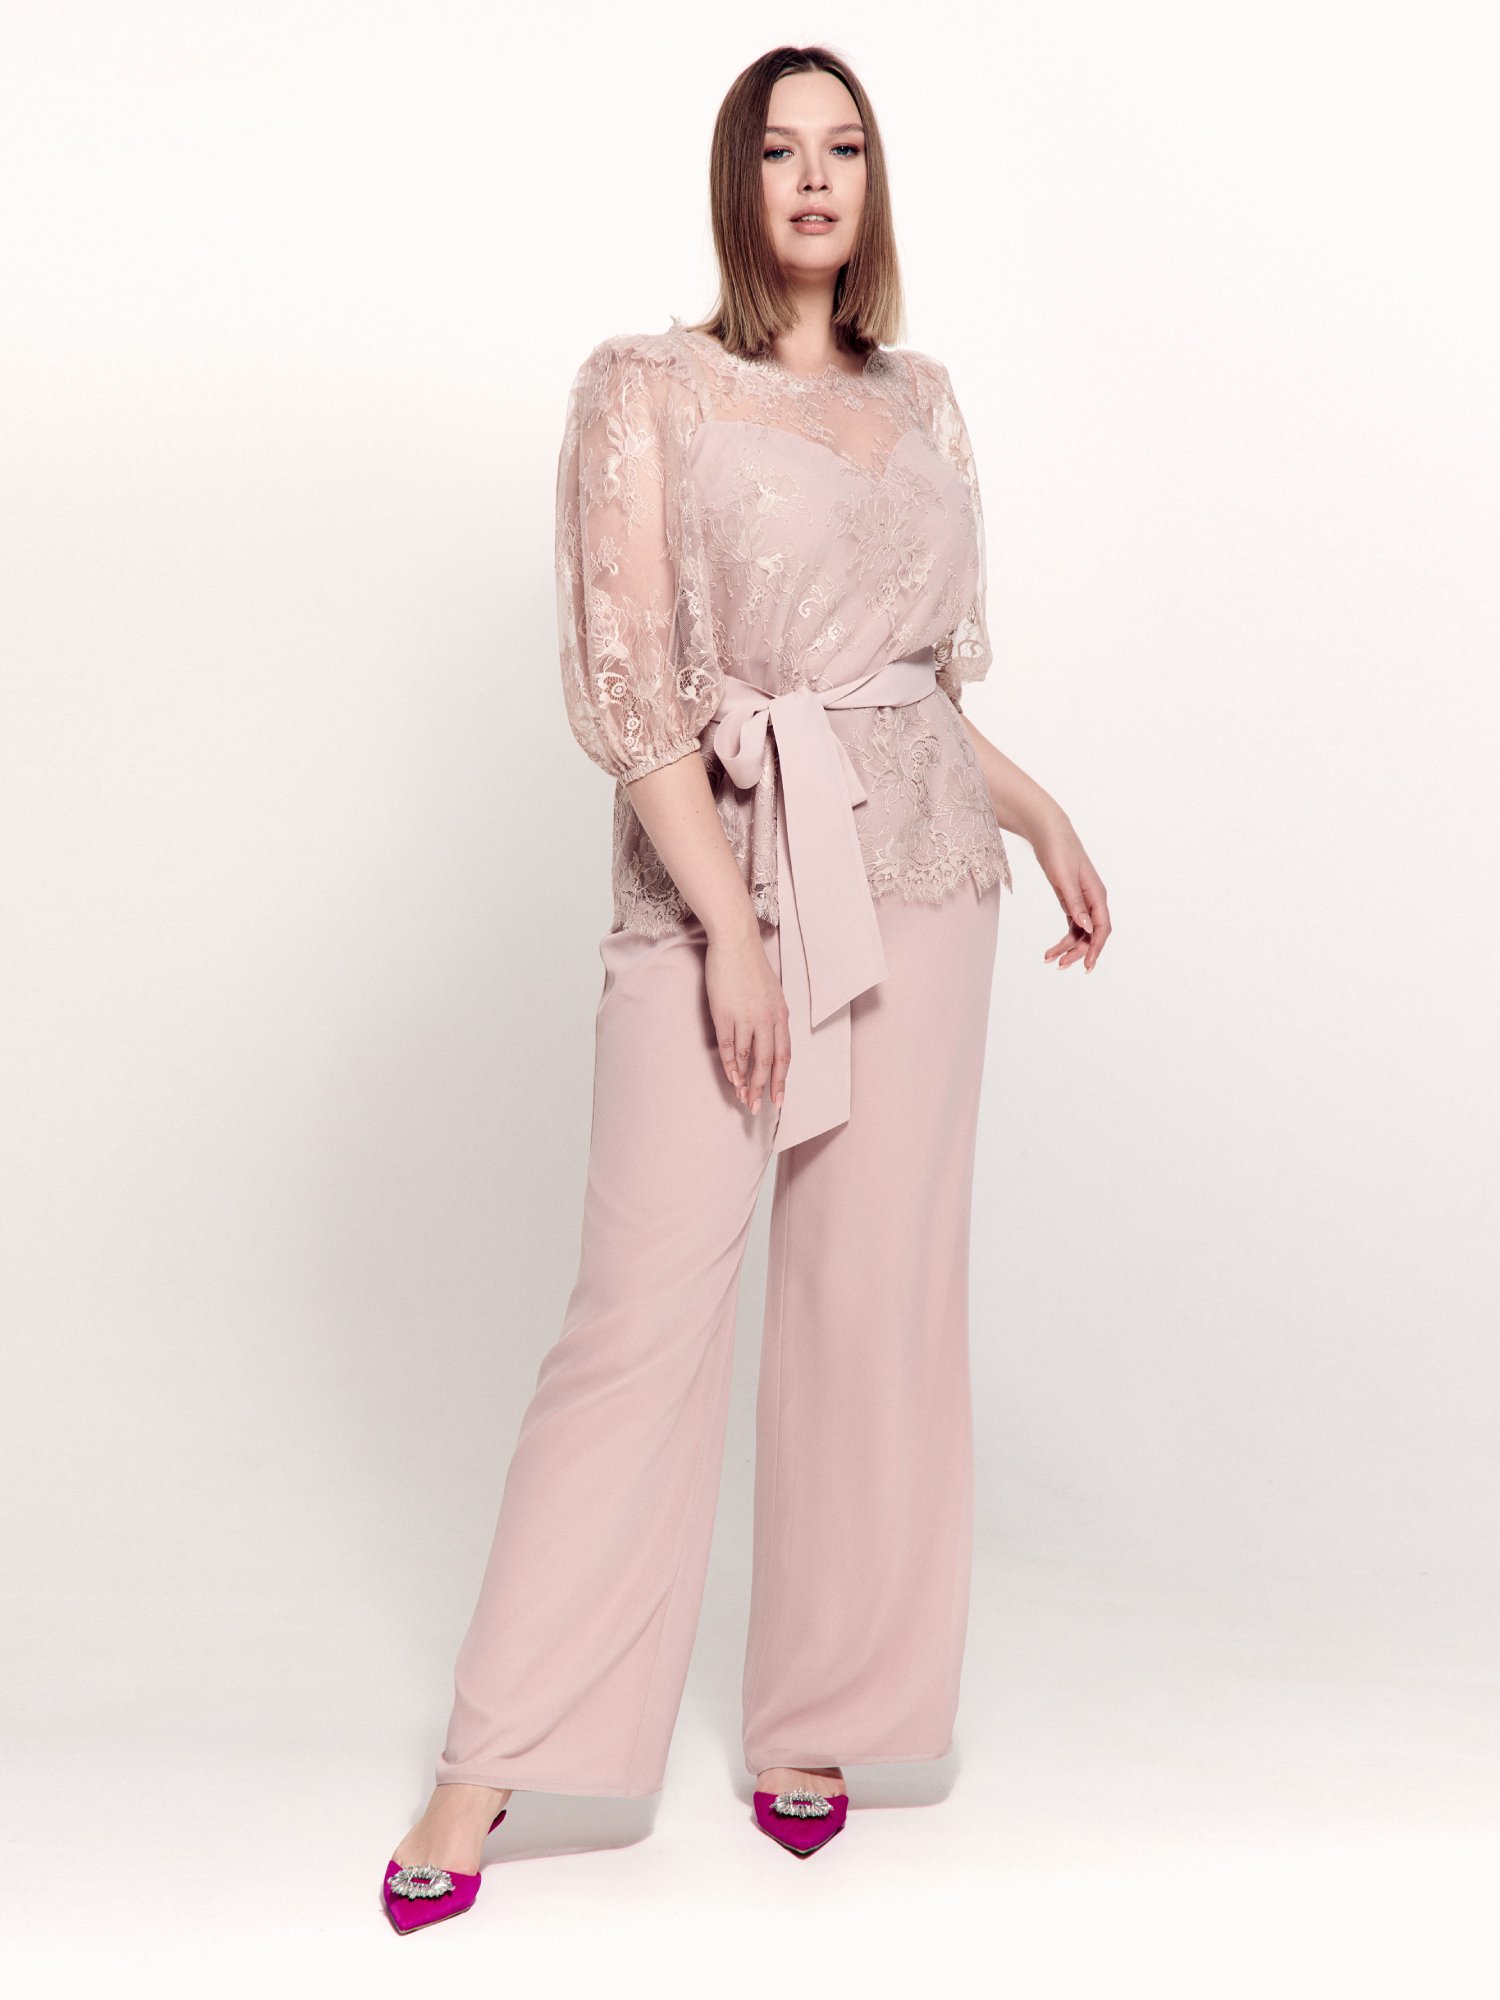 Two-piece evening set with 3/4 sleeve lace blouse and chiffon pants (Plus Size)